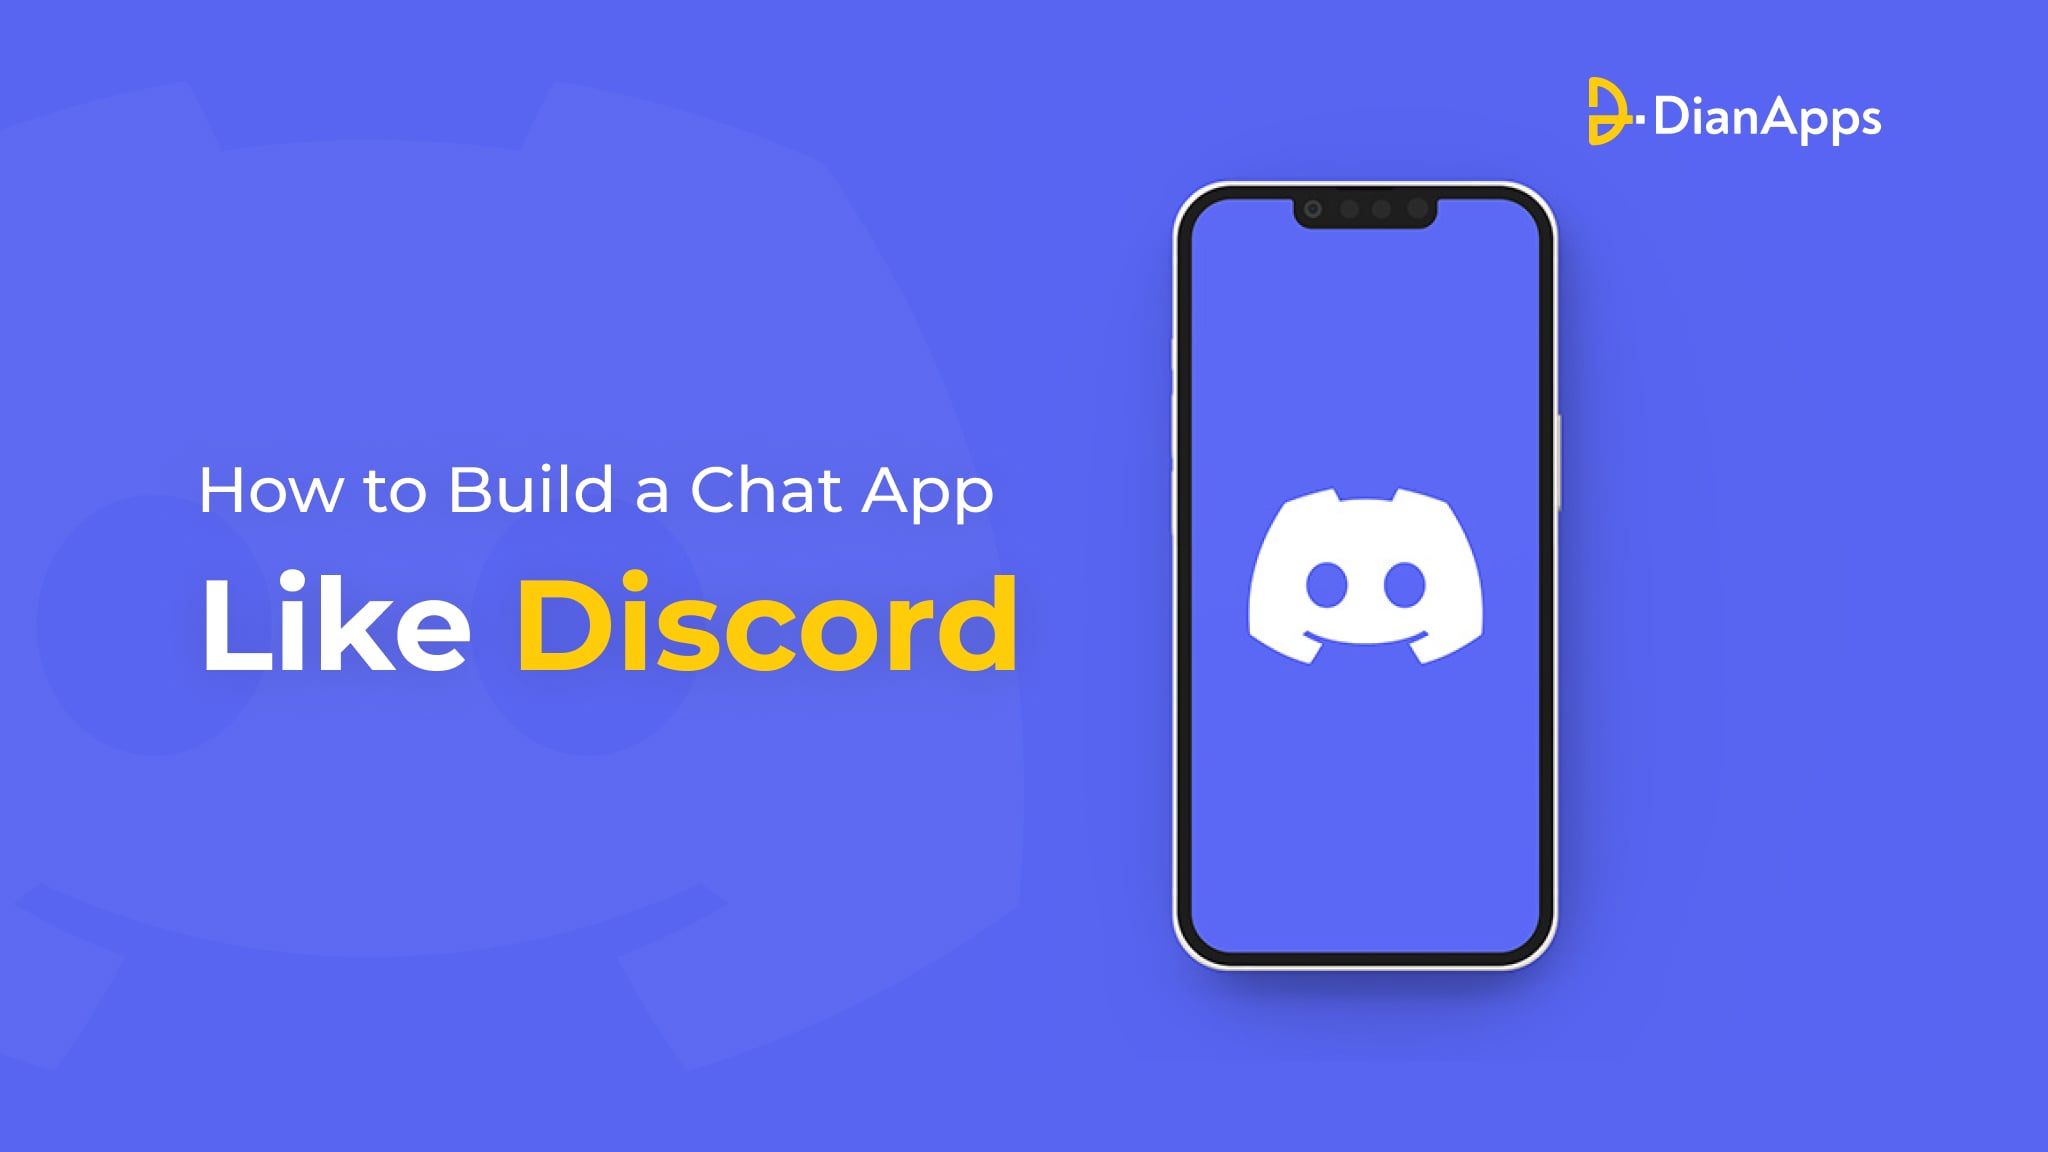 How to Build a Chat App Like Discord